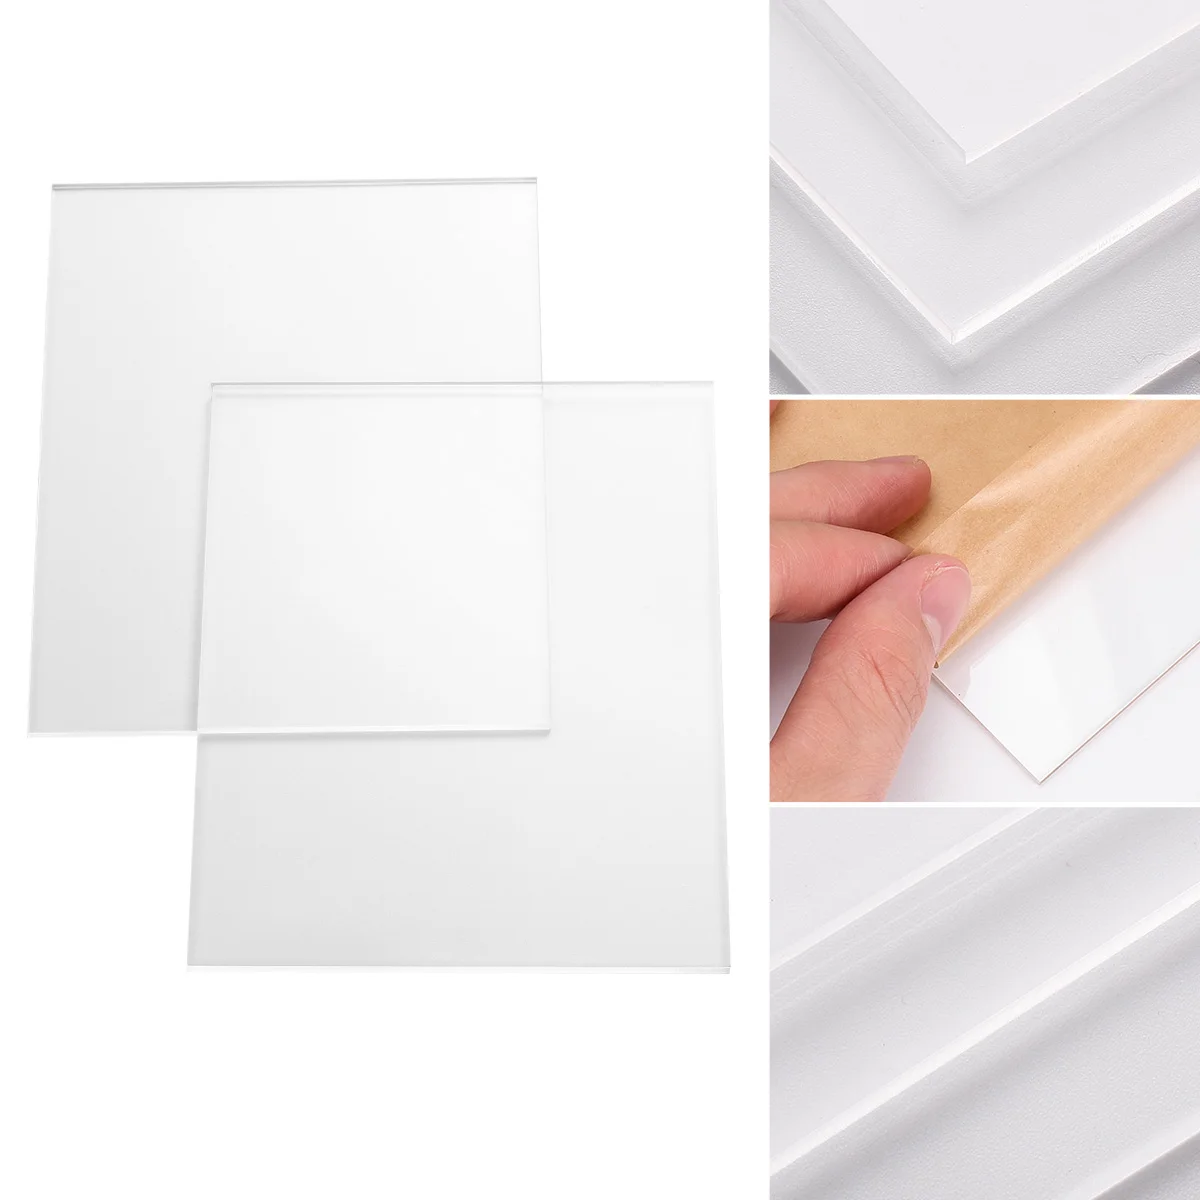 

20pcs Transparent Acrylic Sheets Multifunction Plastic Panels for Crafting Project Picture Frame Cutting